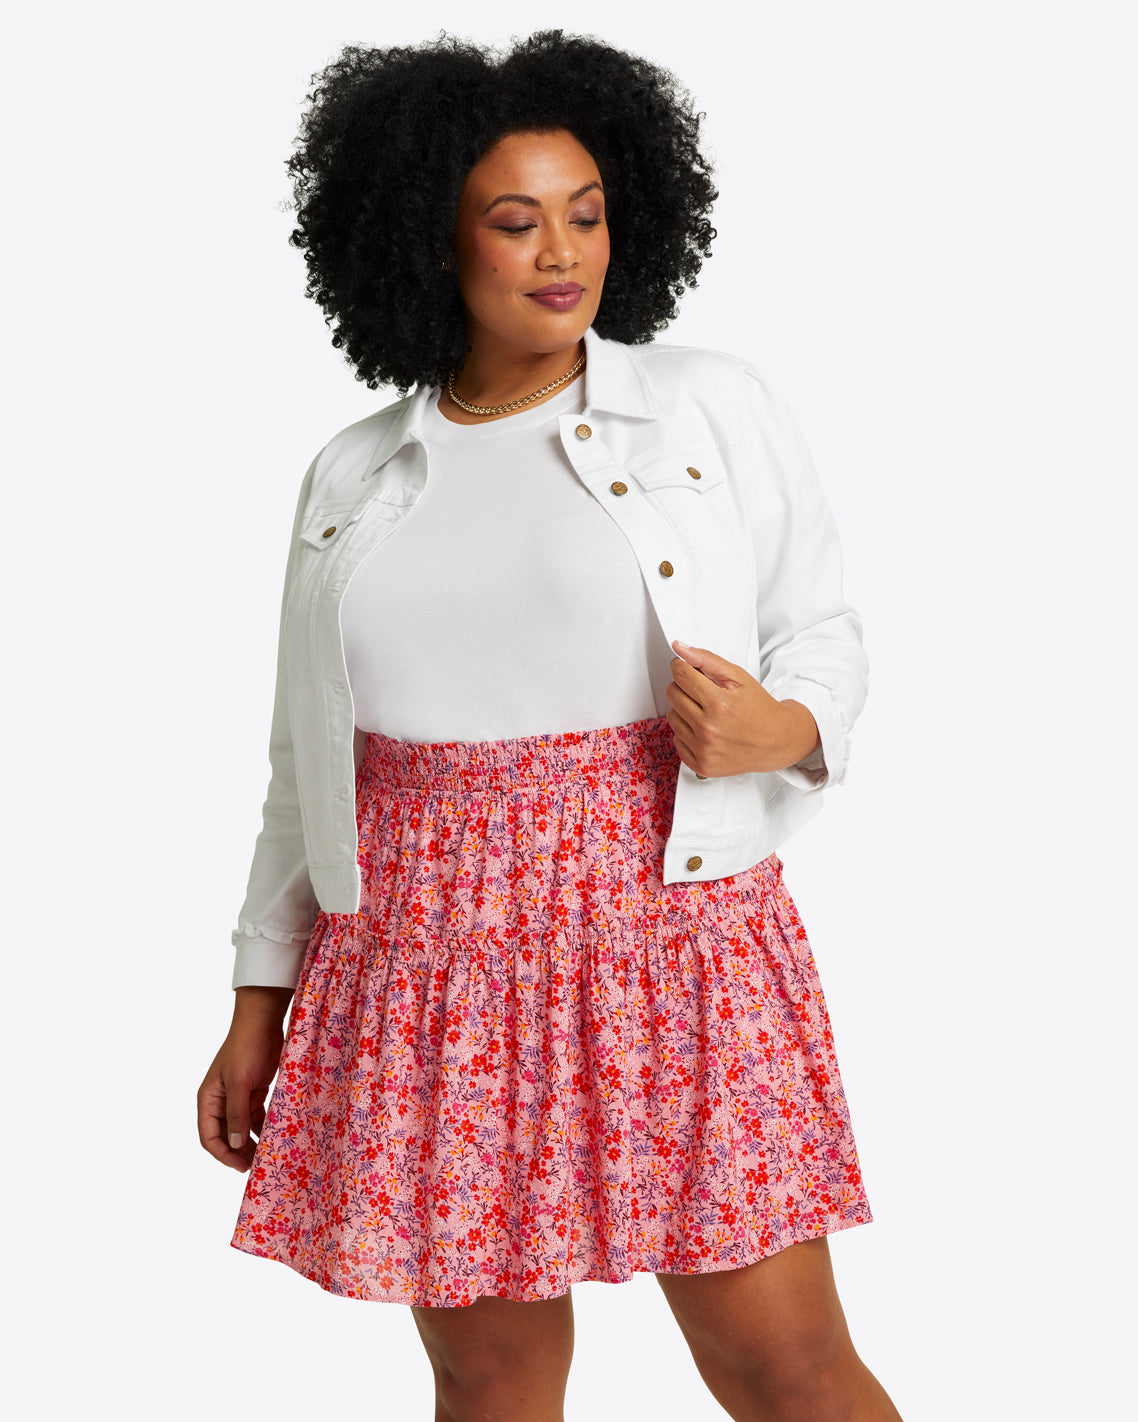 Pull On Mini Skirt in Pansy Floral